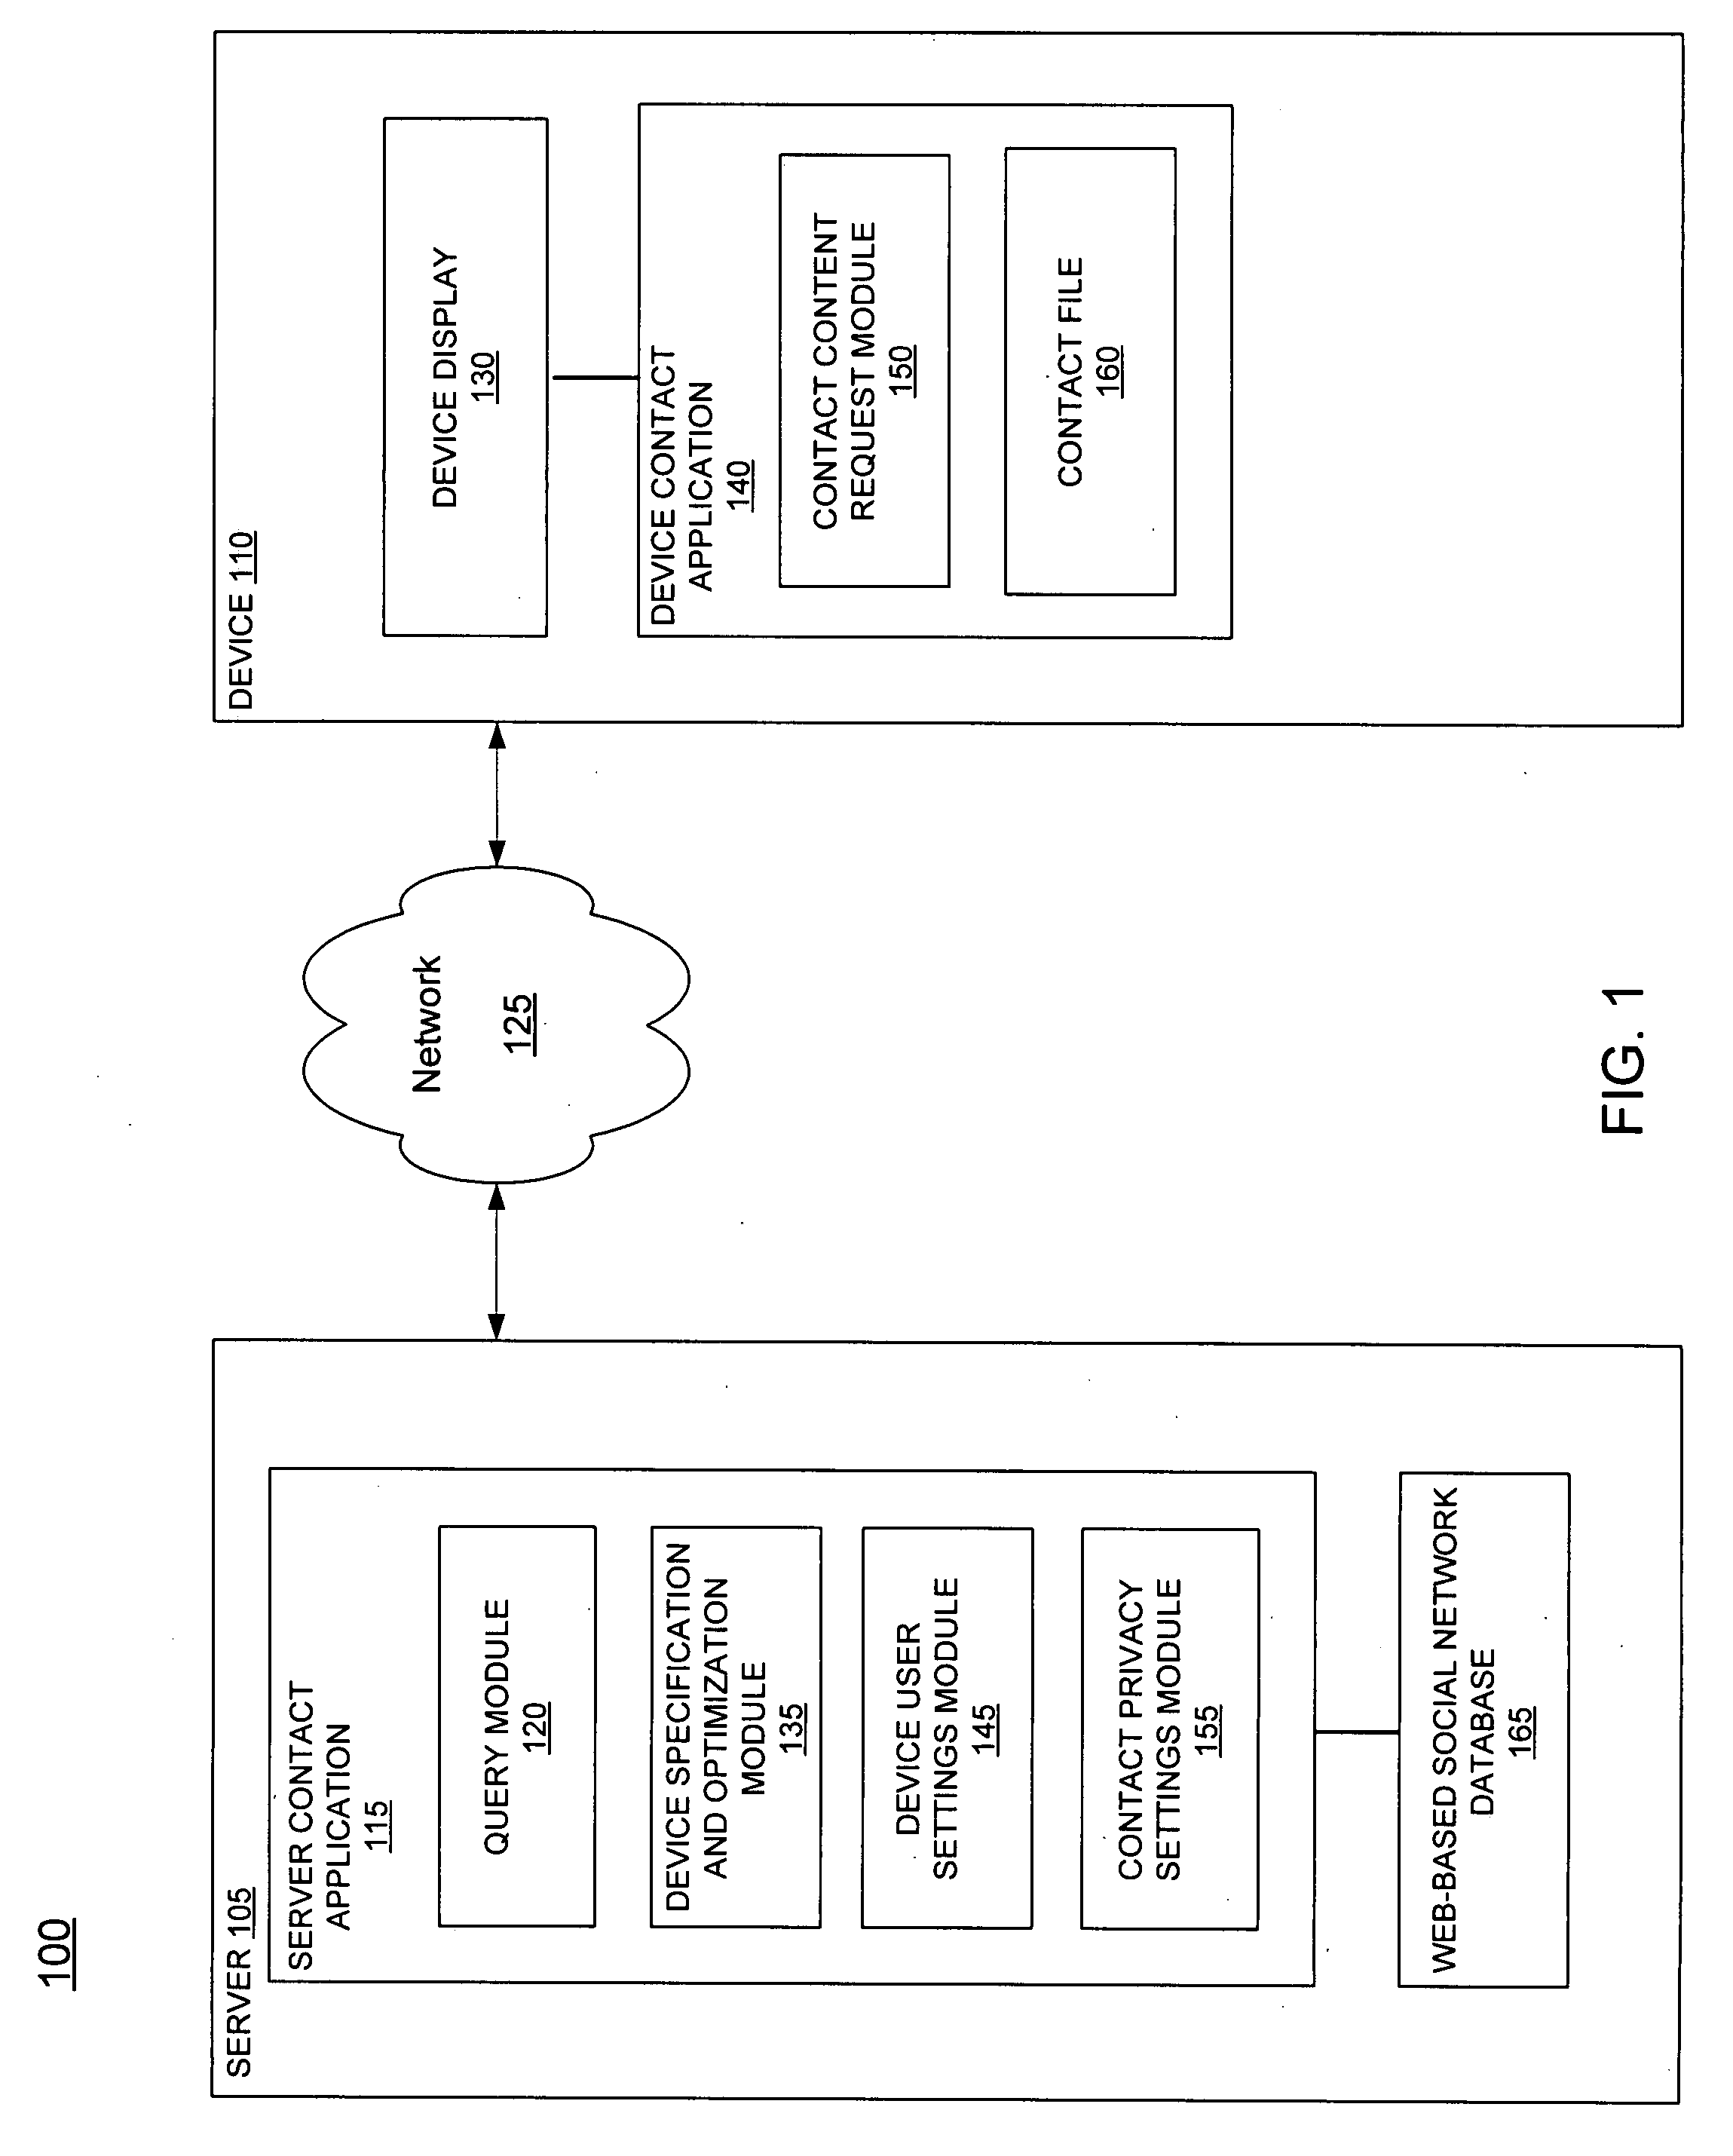 System and method for automatic population of a contact file with contact content and expression content